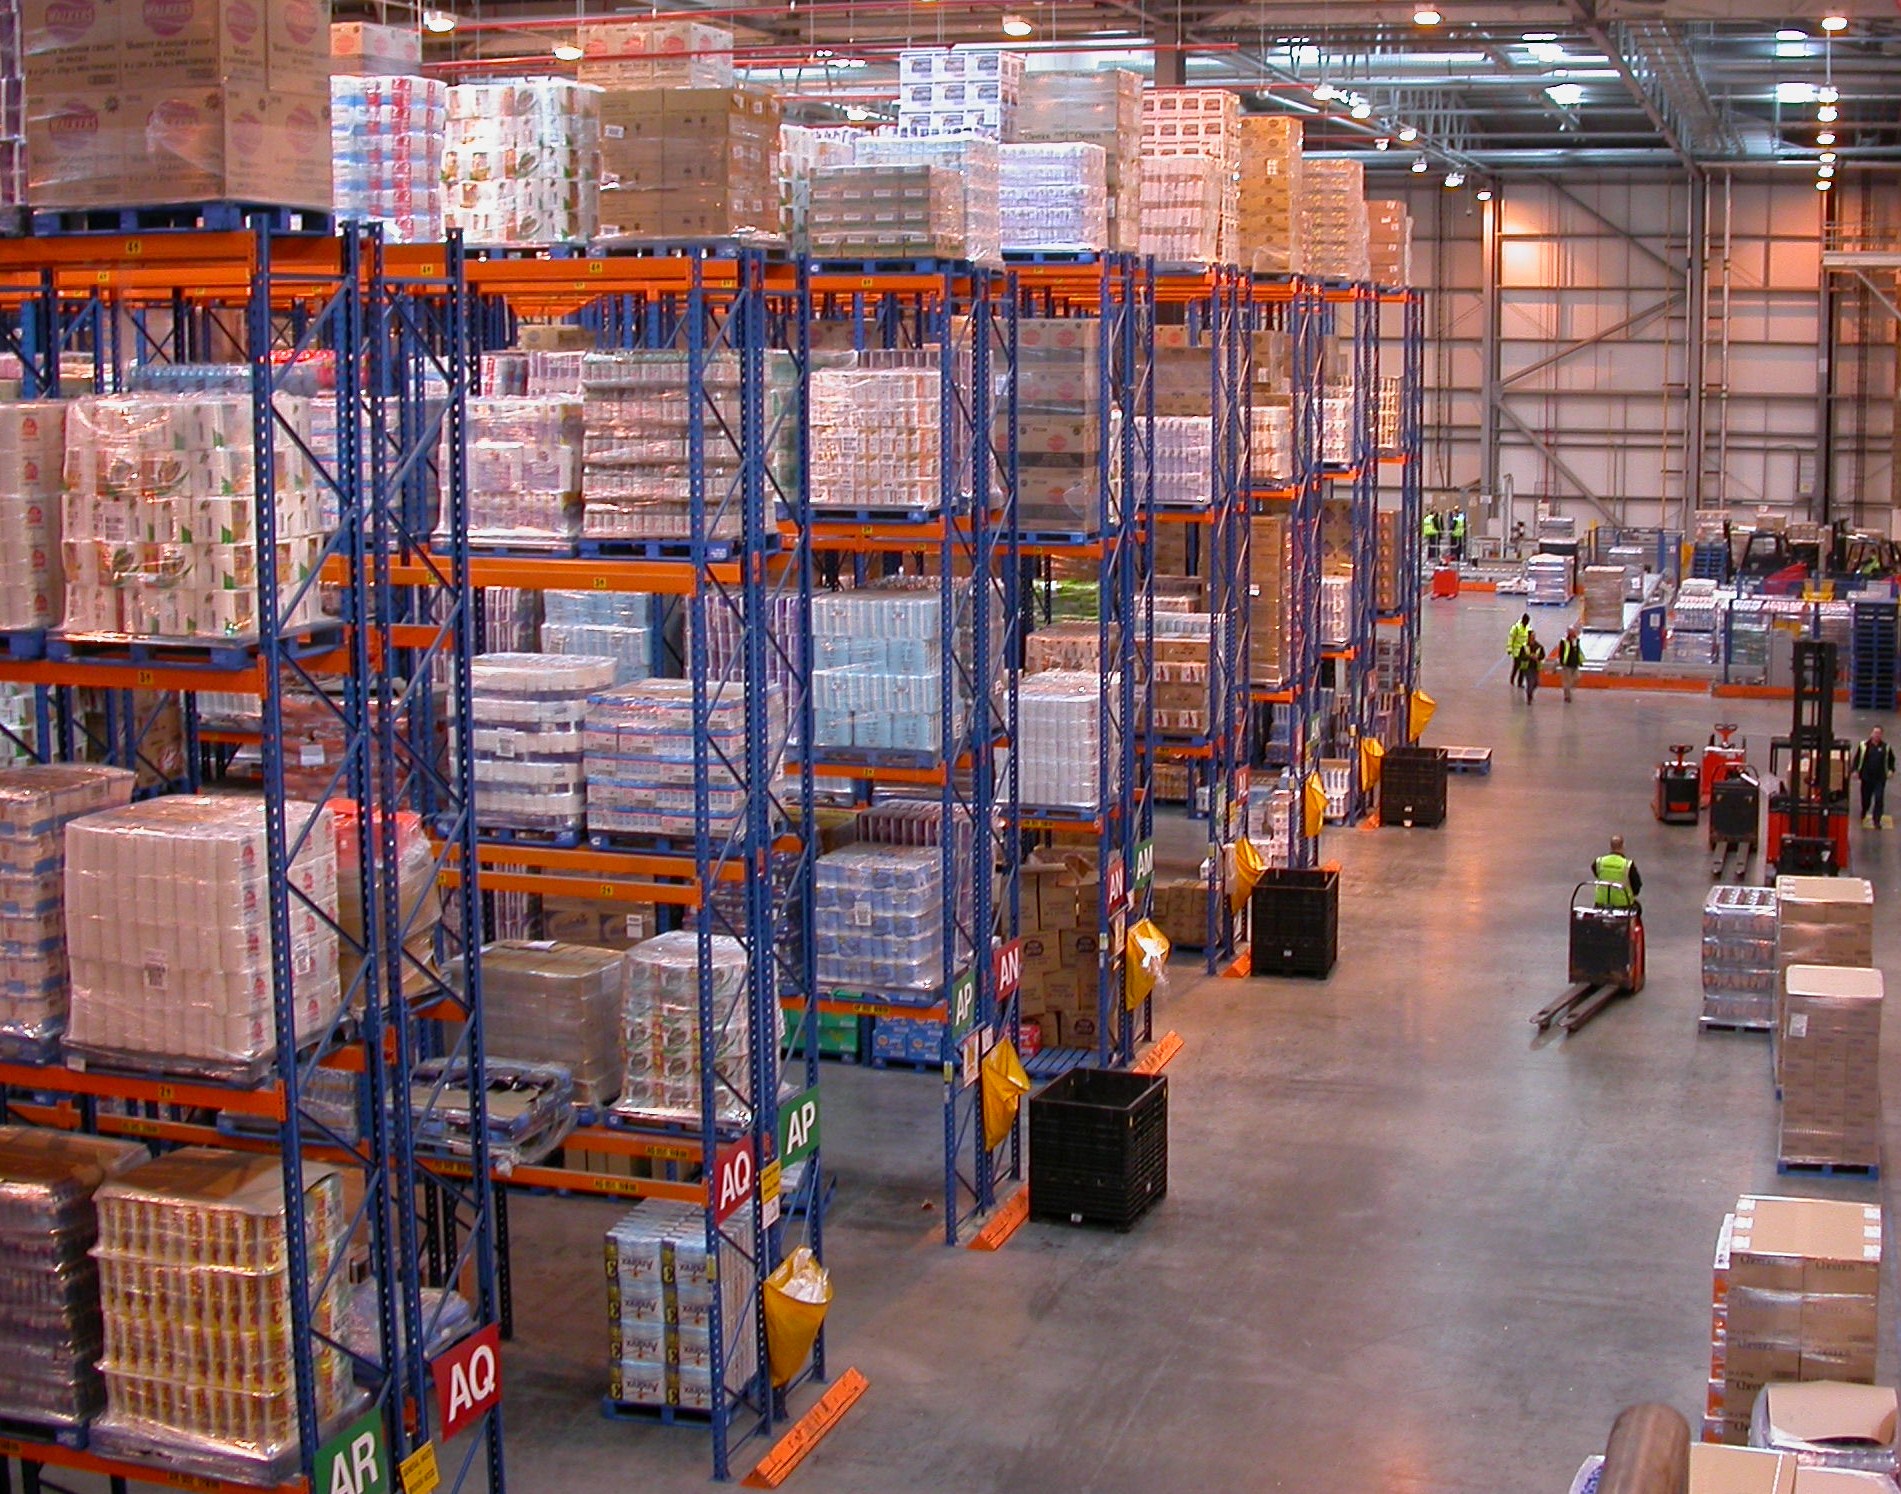 Product Distribution Center